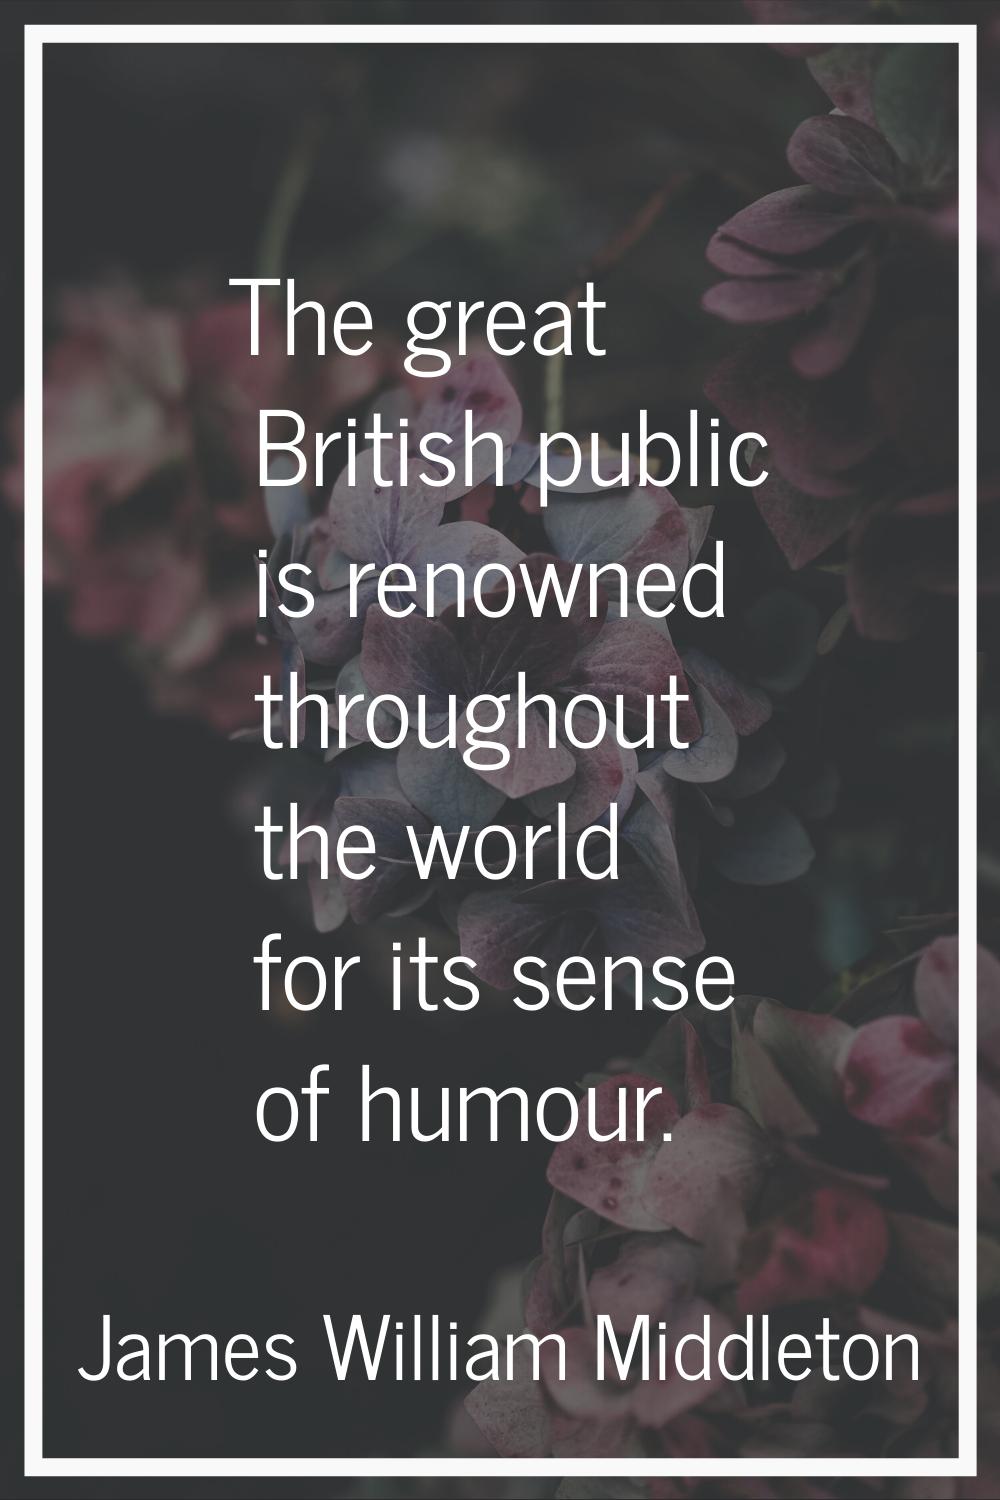 The great British public is renowned throughout the world for its sense of humour.